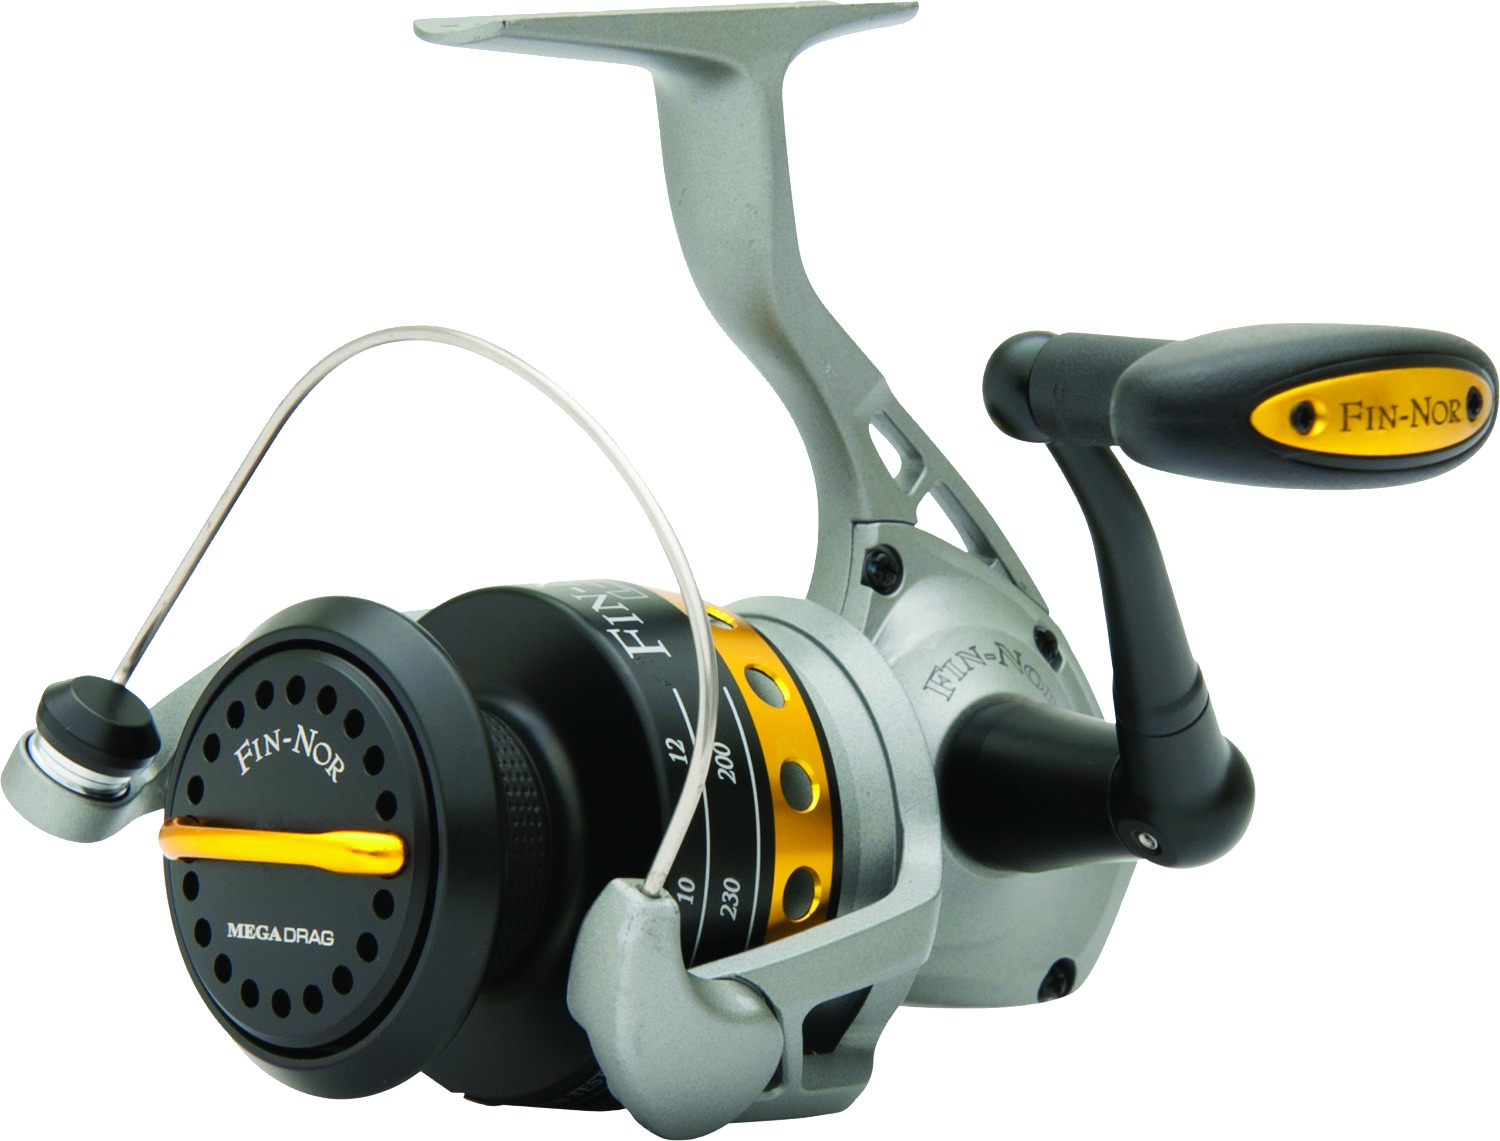 fin nor leathel spin reel